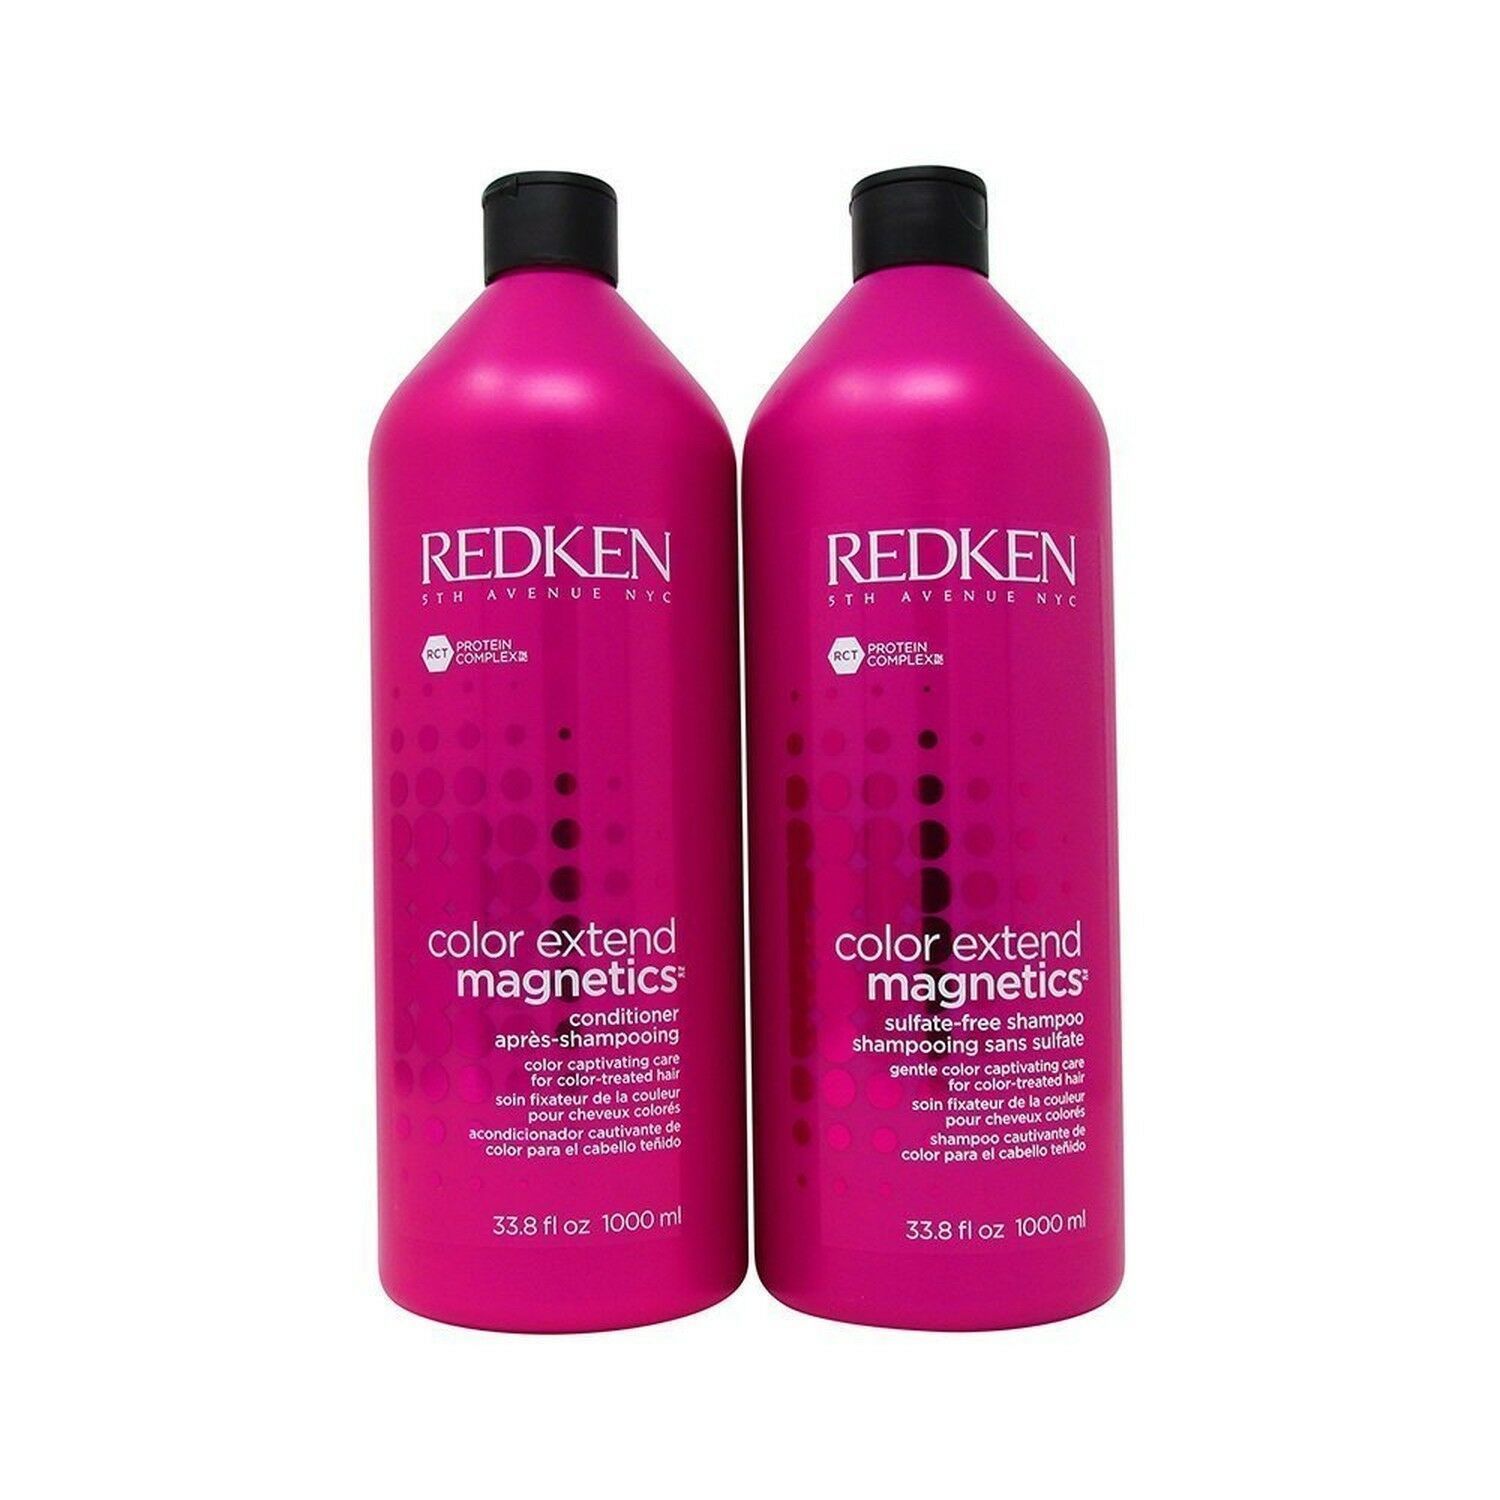 Redken Color Extend Magnetics Sulfate Free Shampoo & Conditioner 33oz Liter Duo - $69.00